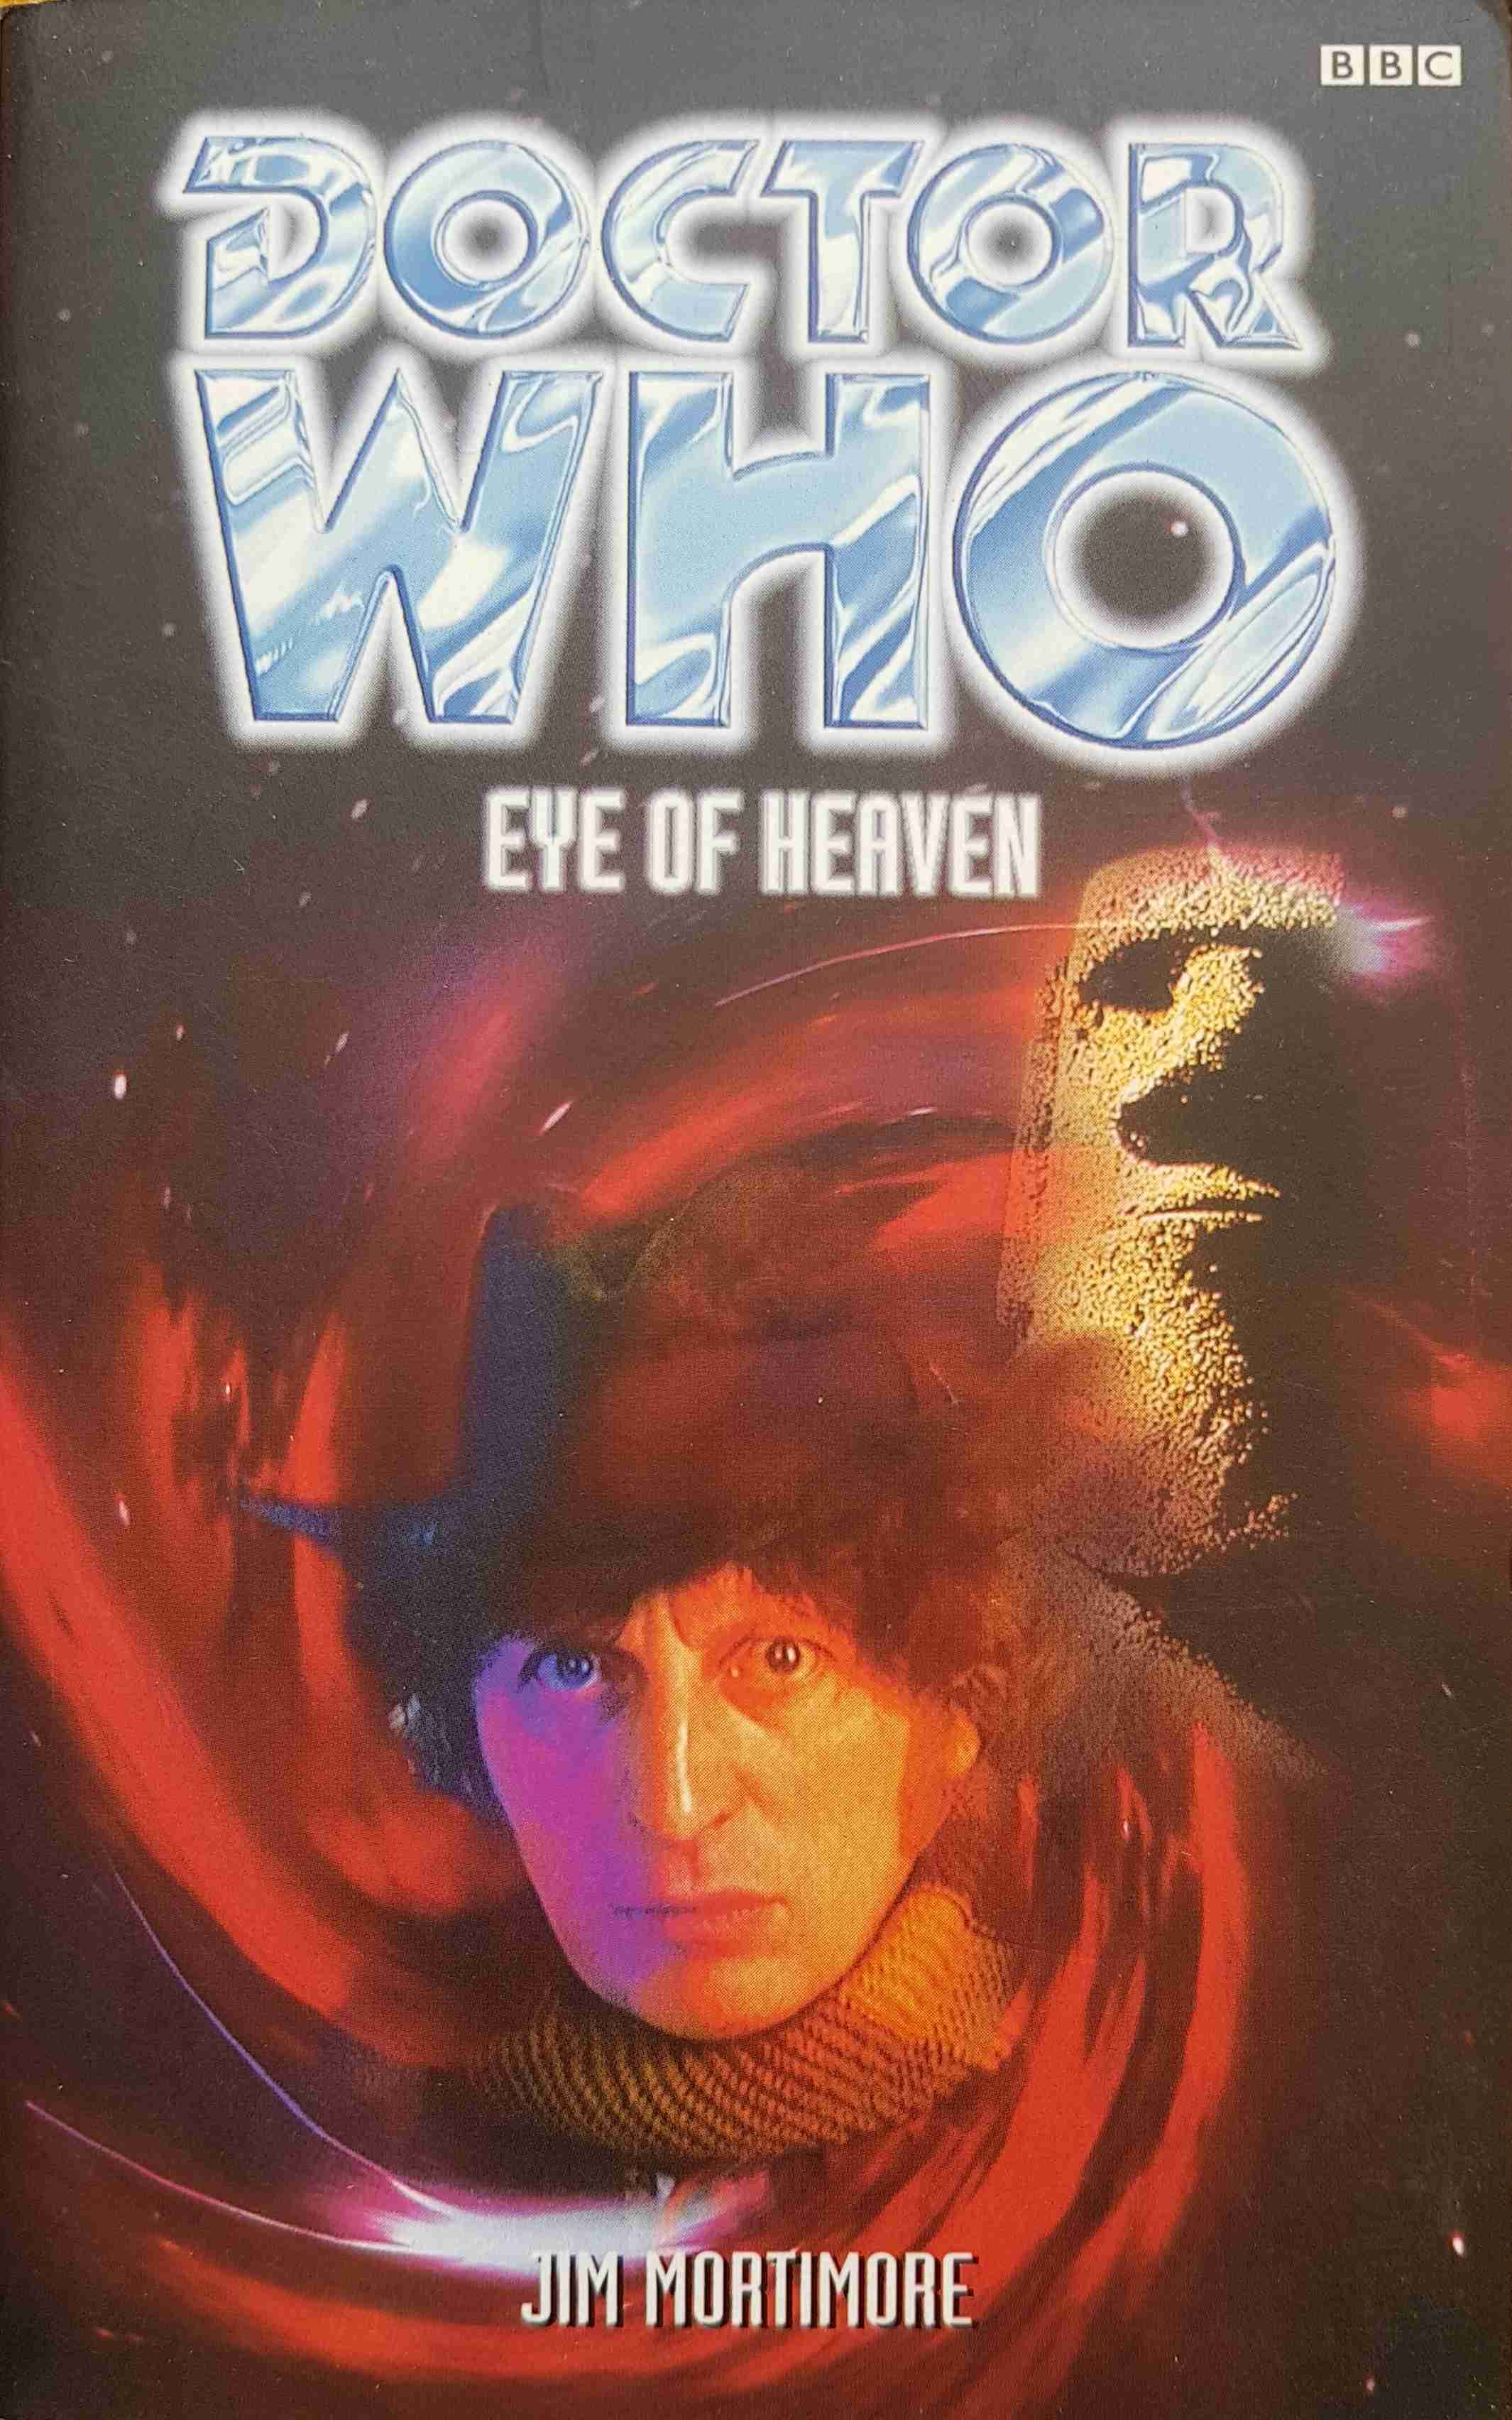 Picture of 0-563-40567-8 Doctor Who - Eye of Heaven by artist Jim Mortimore from the BBC books - Records and Tapes library